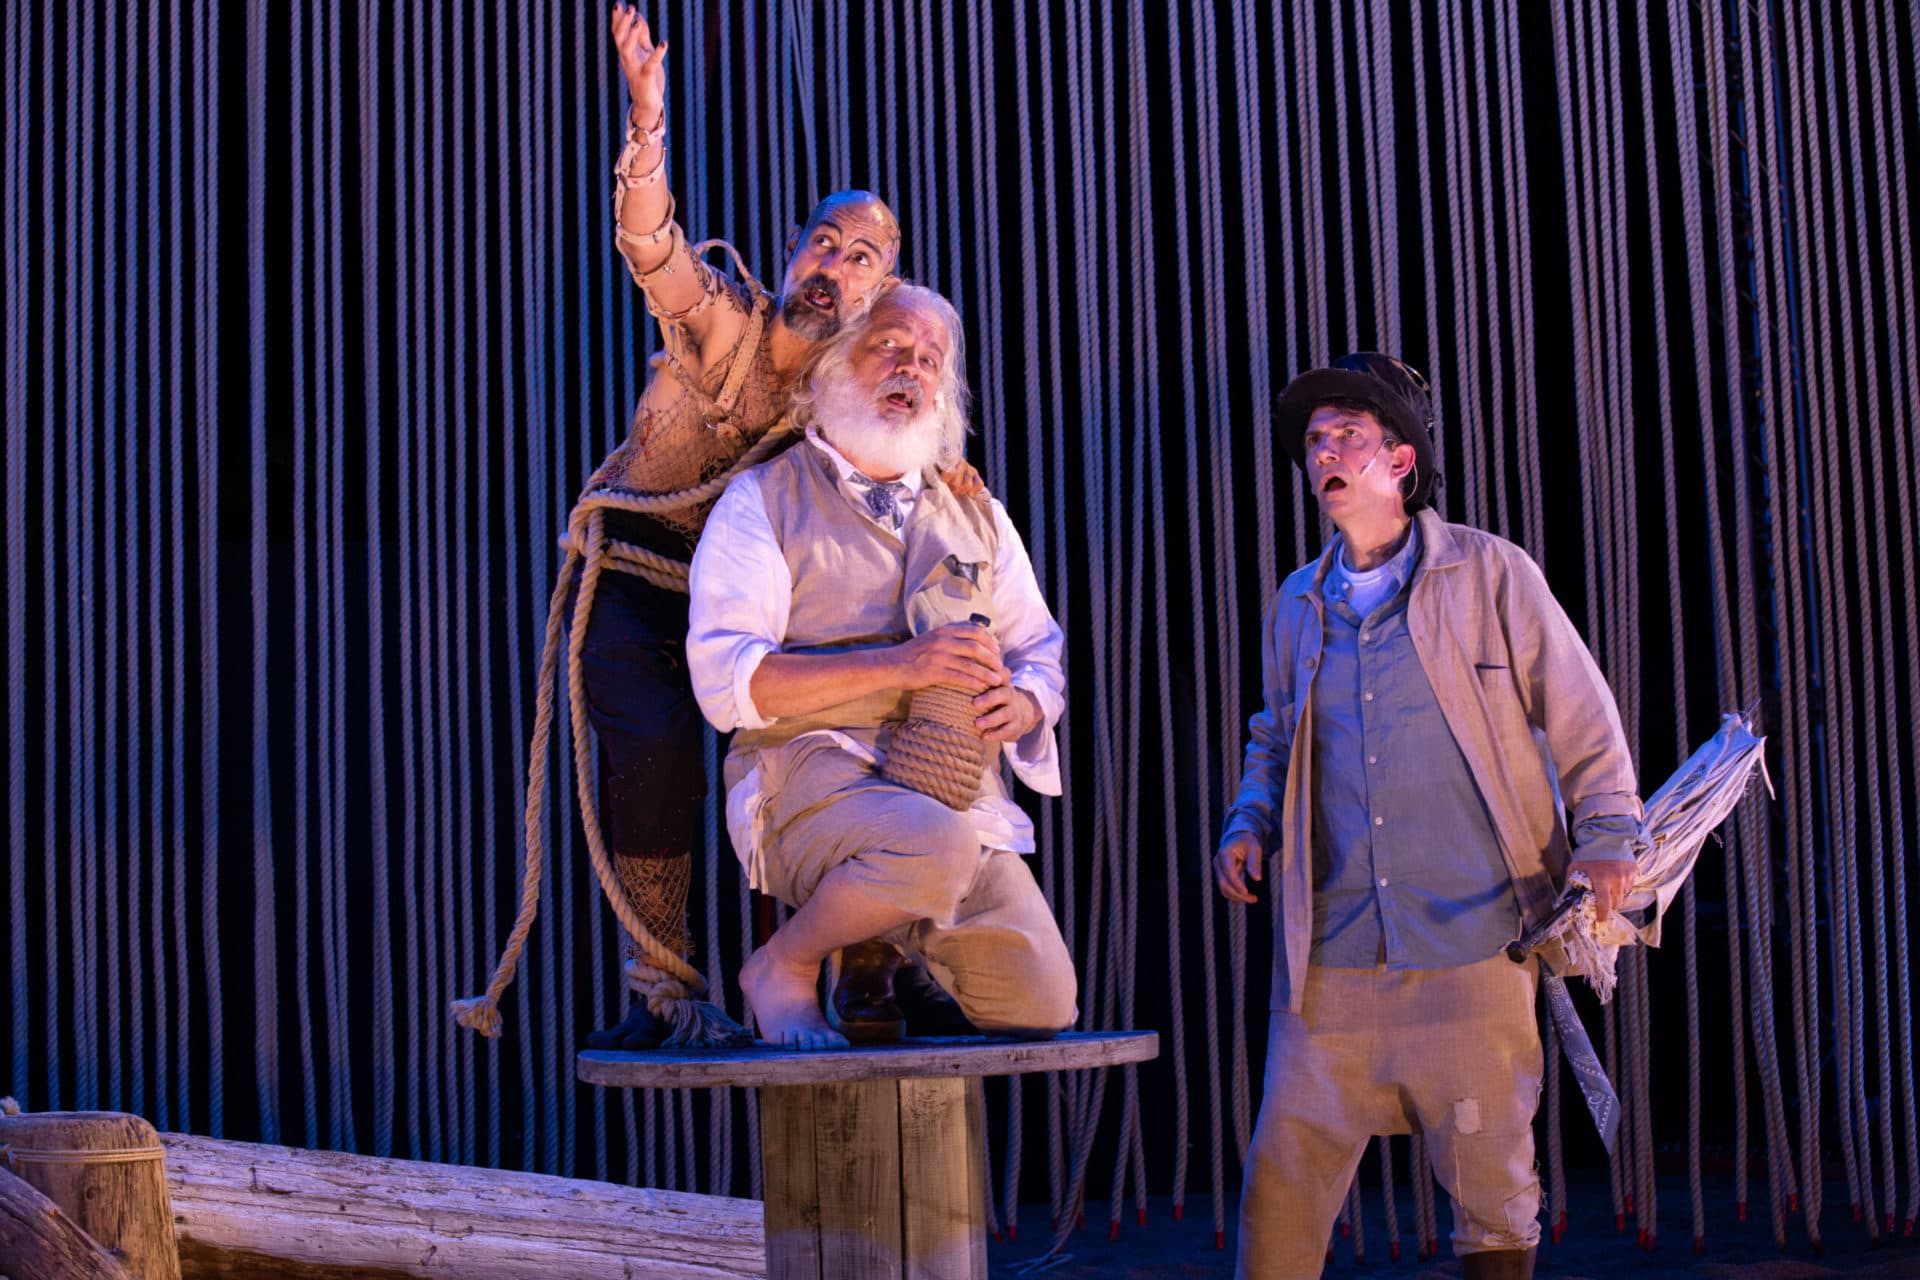 Nael Nacer as Caliban, Fred Sullivan Jr. as Stephano and John Kuntz as Trinculo in &quot;The Tempest.&quot; (Courtesy Michael Underhill as Ferdinand, John Douglas Thompson as Prospero and Nora Eschenheimer as Miranda in the Commonwealth Shakespeare Company's production of &quot;The Tempest.&quot; (Courtesy Evgenia Eliseeva)